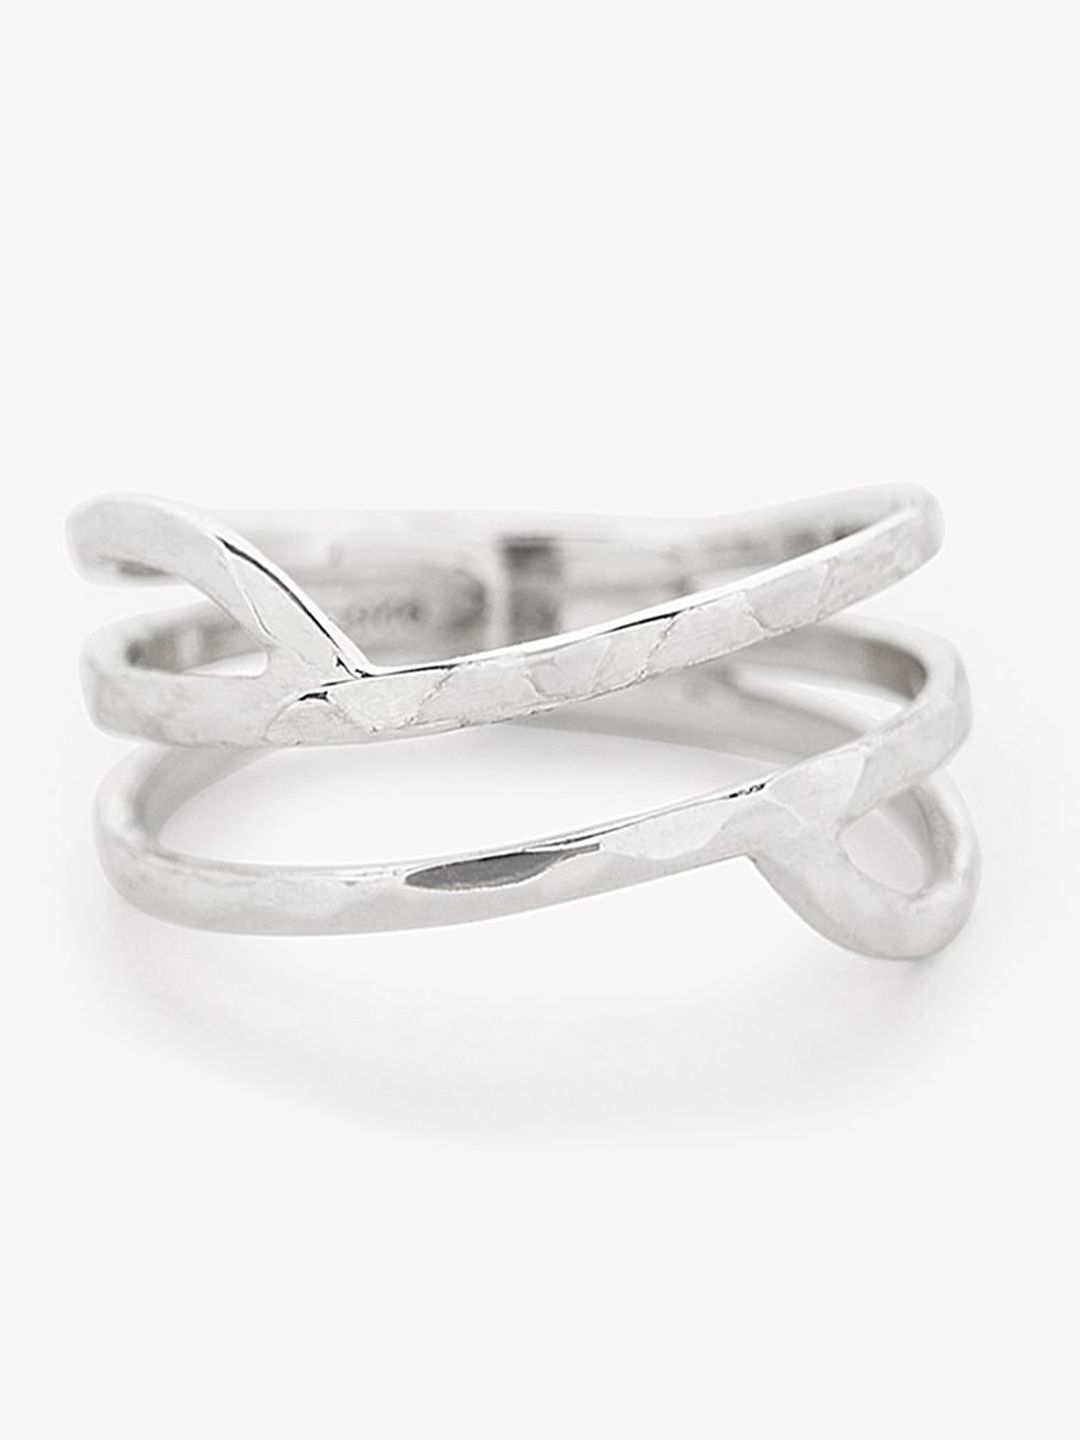 Mikoto by FableStreet Rhodium-Plated Silver-Toned Entwine Finger Ring Price in India